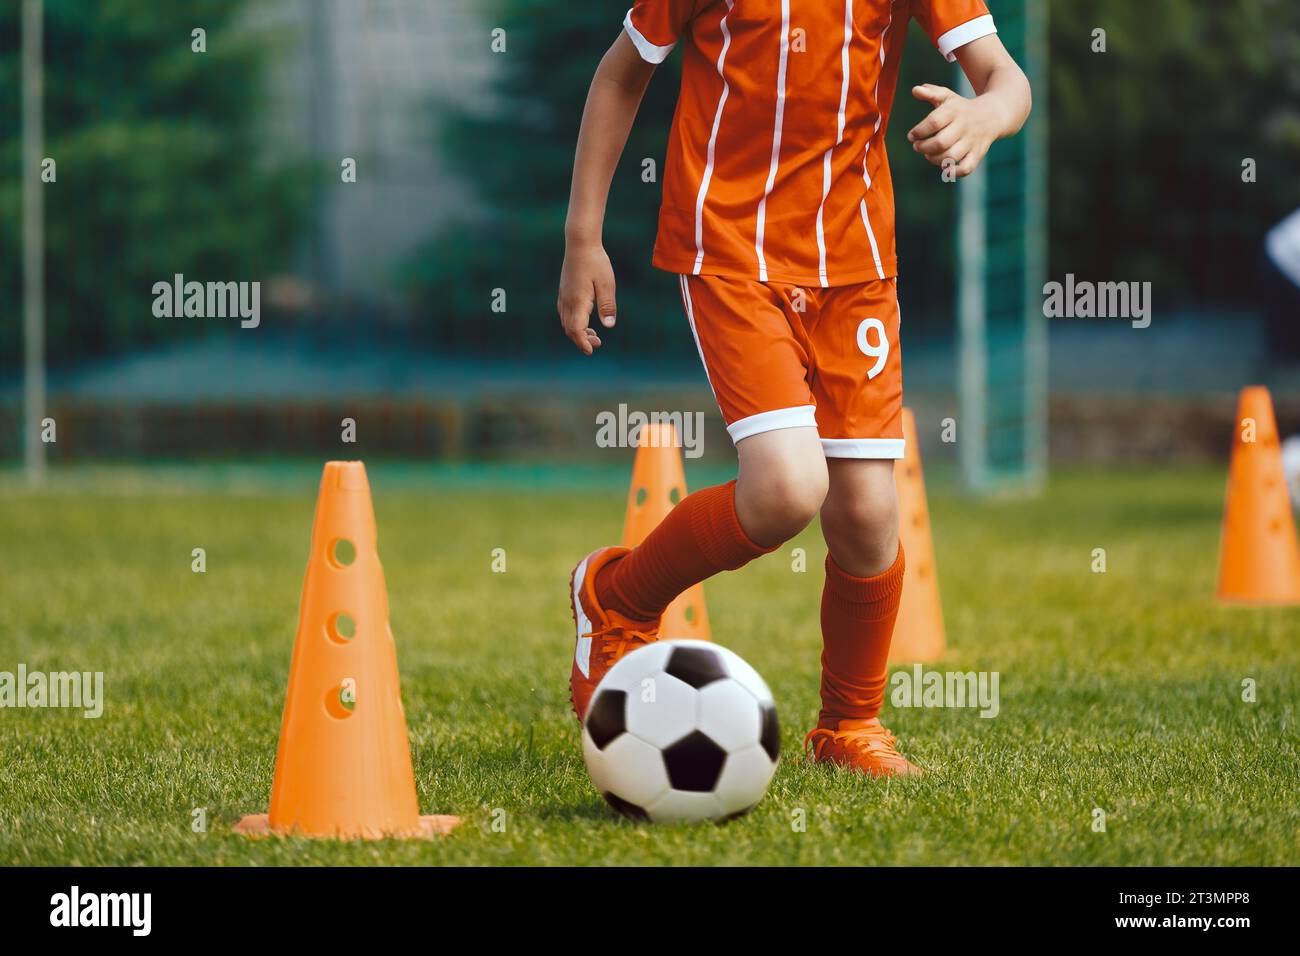 Children practicing dribbling at soccer pitch. Young boy running soccer ball in slalom drill between training cones Stock Photo